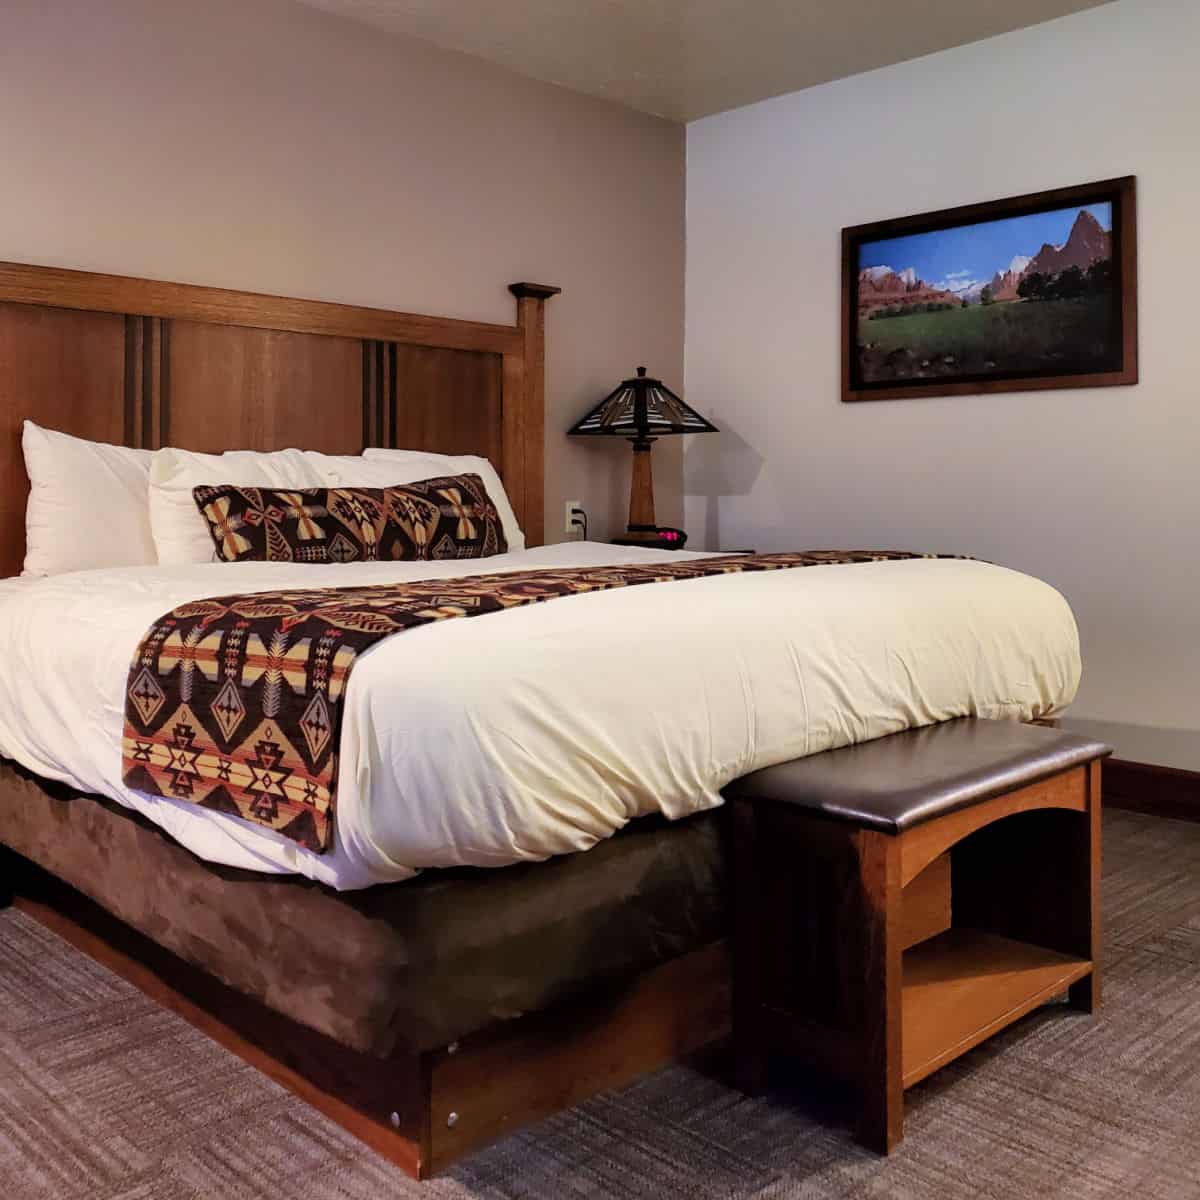 King size Bed in room at Zion National Park Lodge